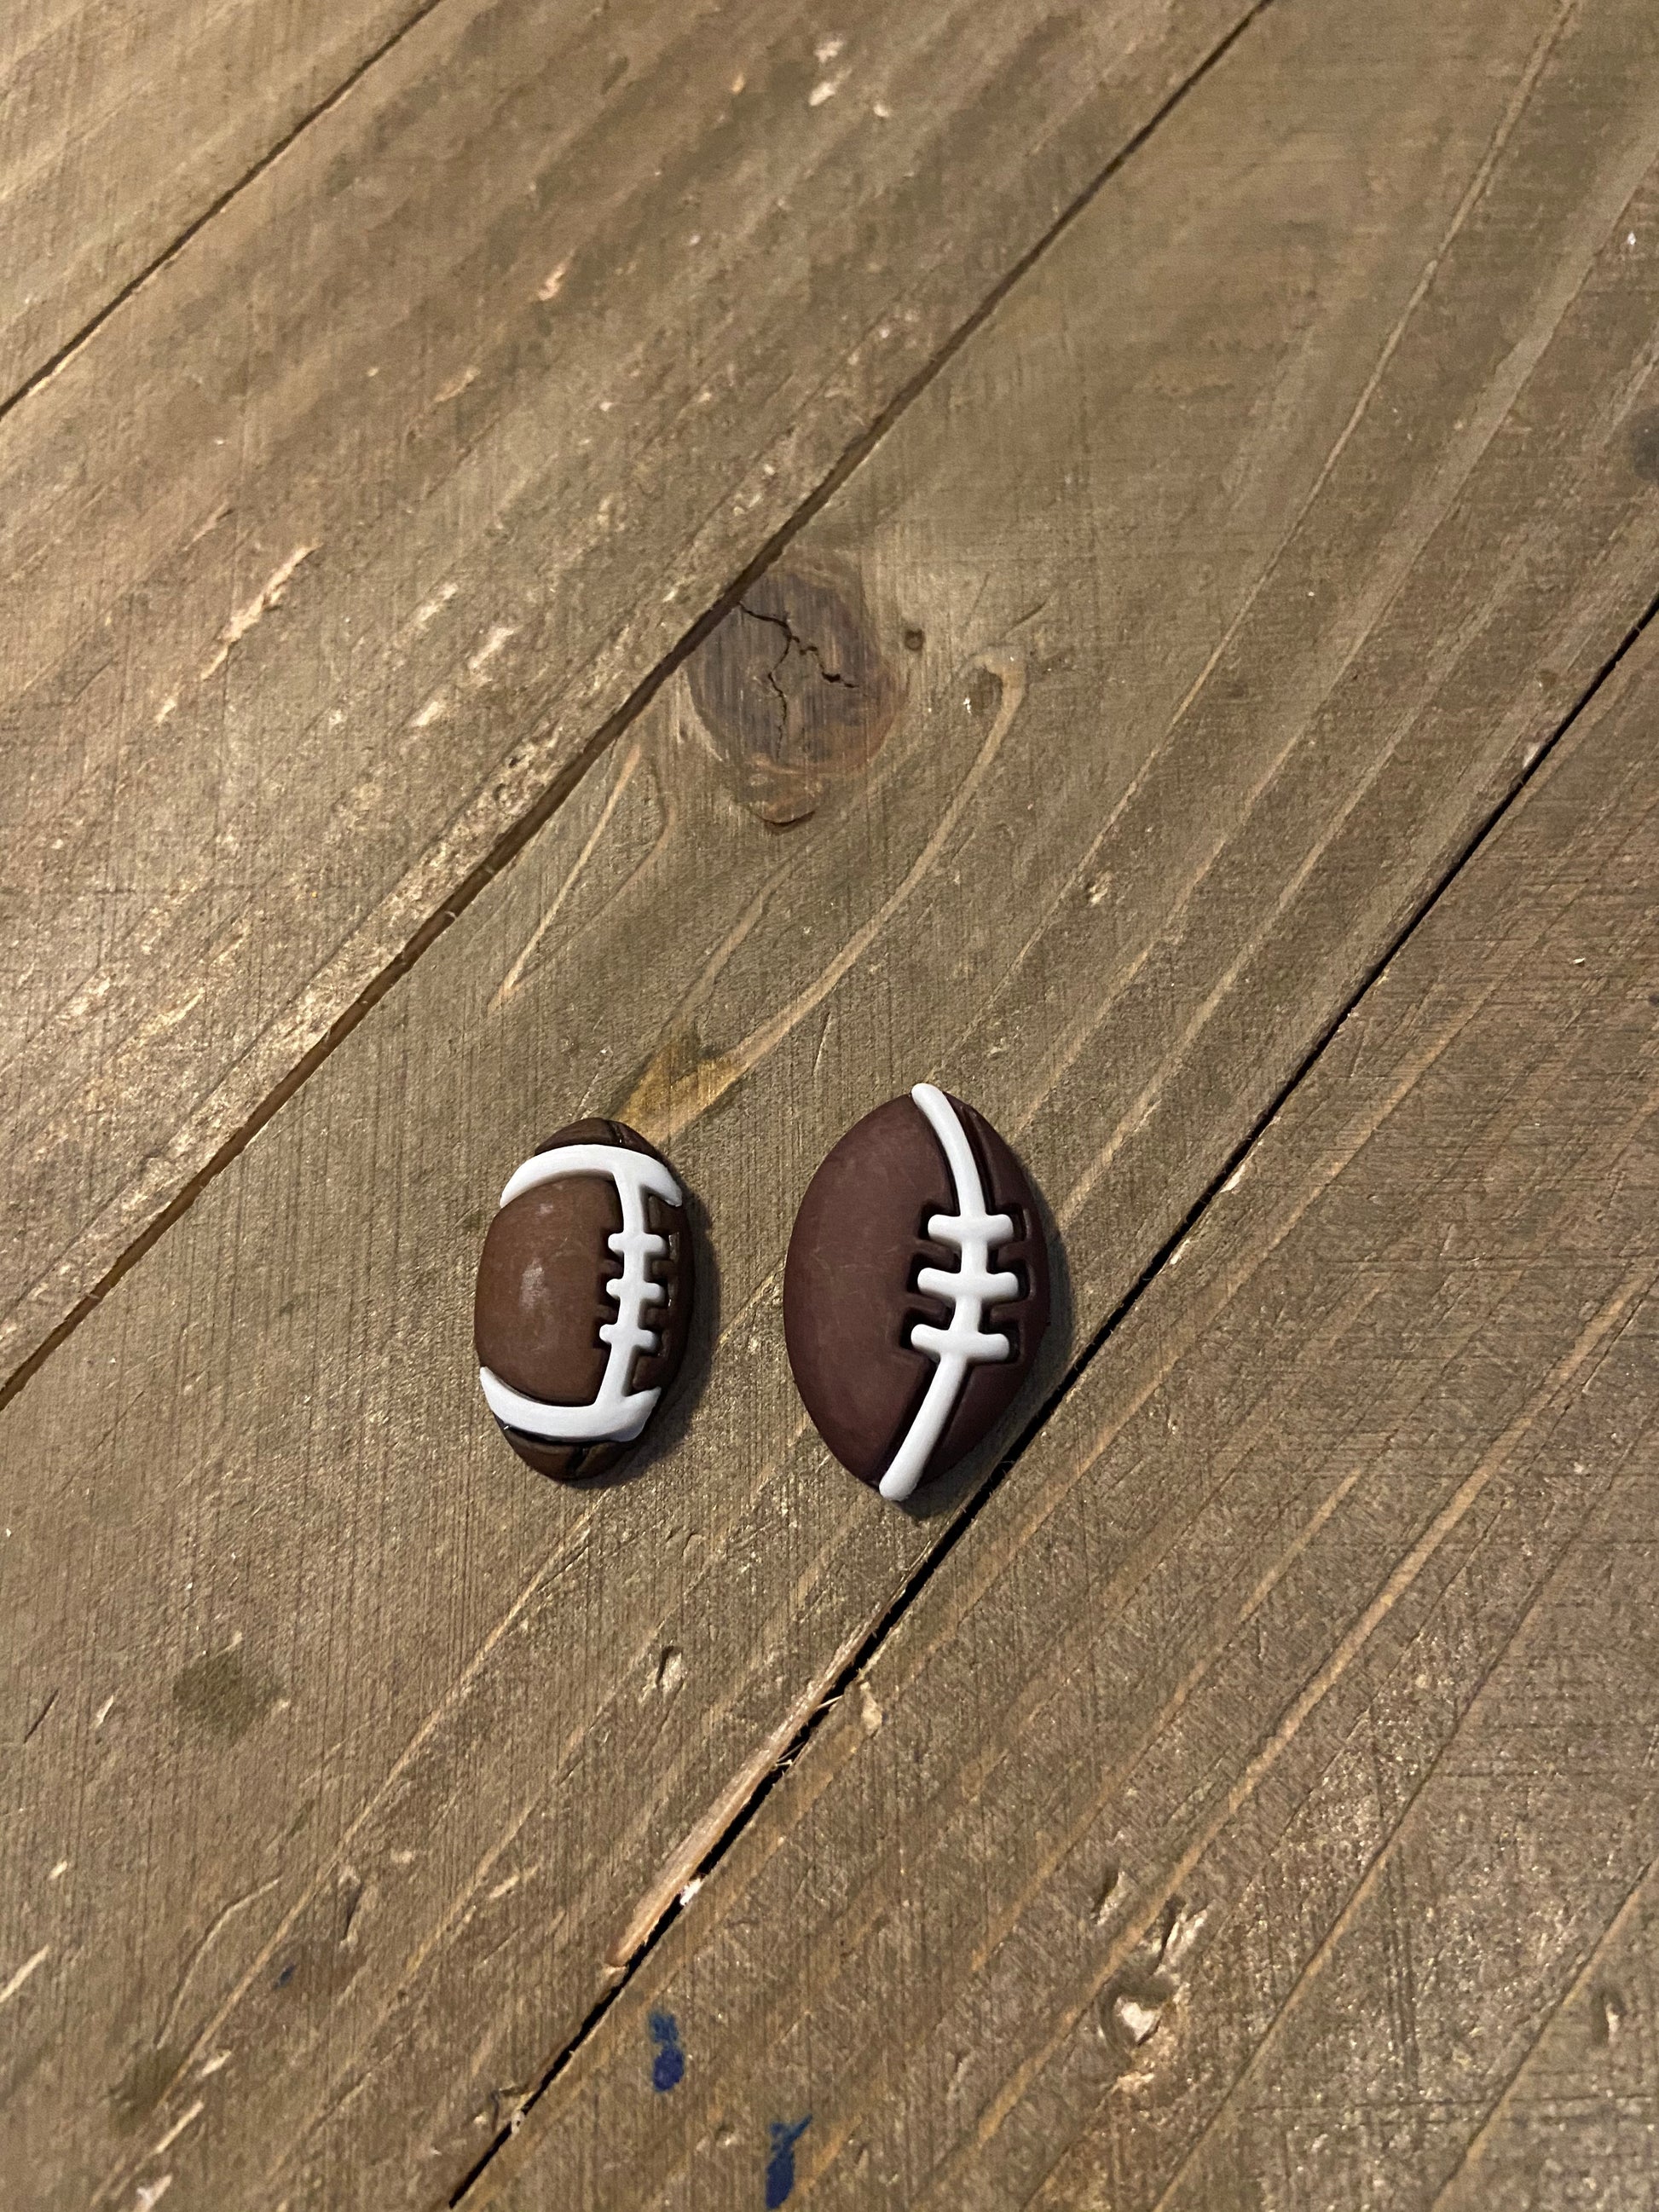 Football post earrings-Are you ready for some football!!!Pink tiful of LOVE